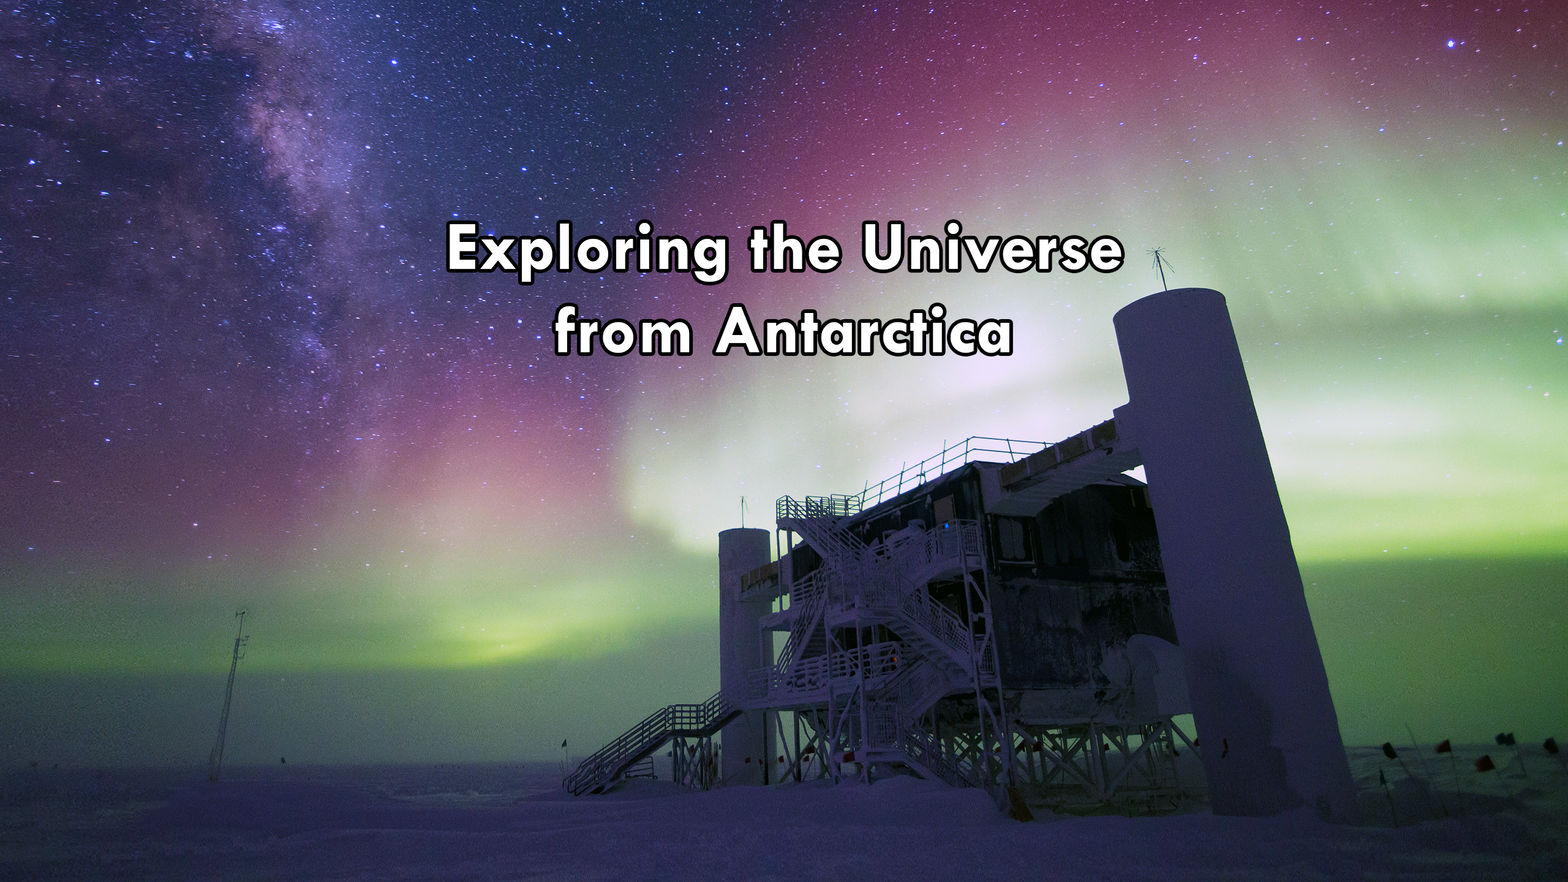 Exploring the Universe from Antarctica